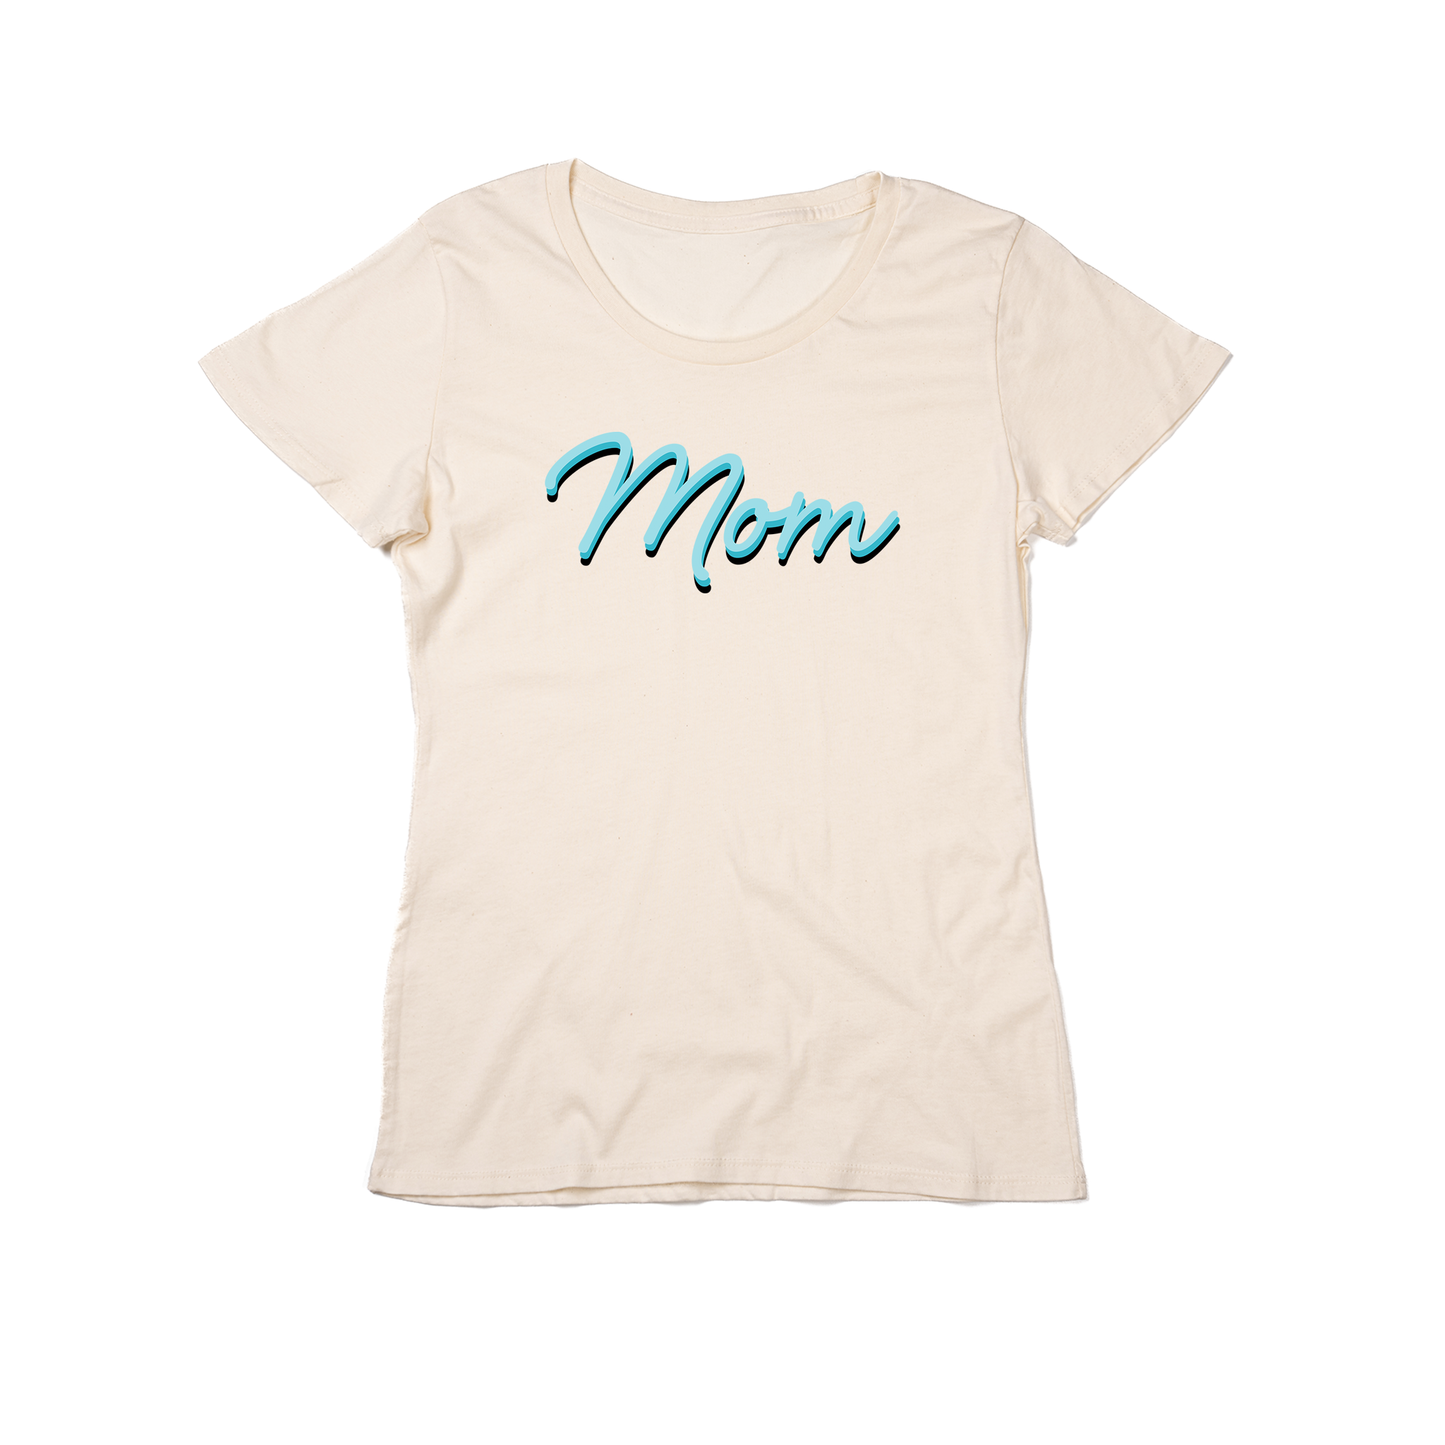 Mom (90's Inspired, Blue) - Women's Fitted Tee (Natural)